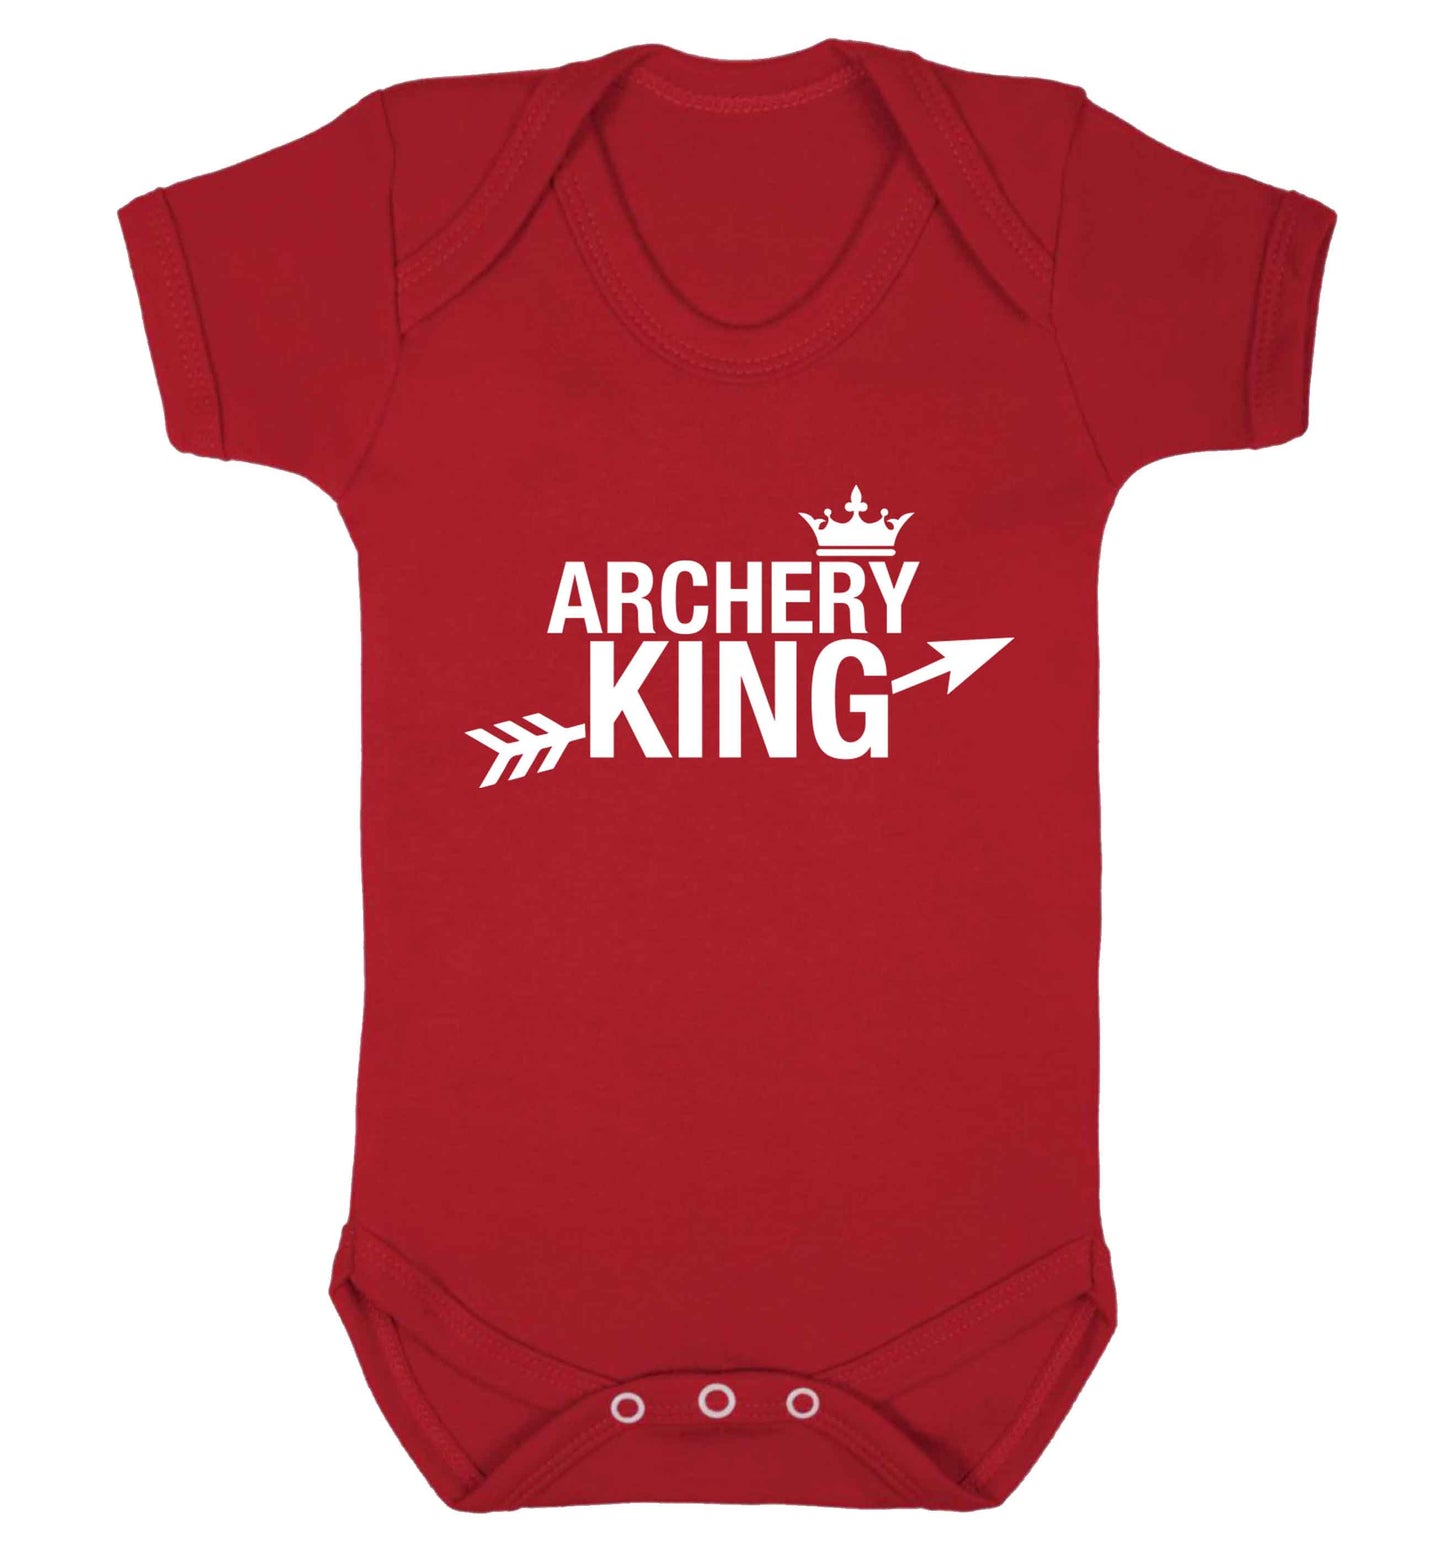 Archery king Baby Vest red 18-24 months